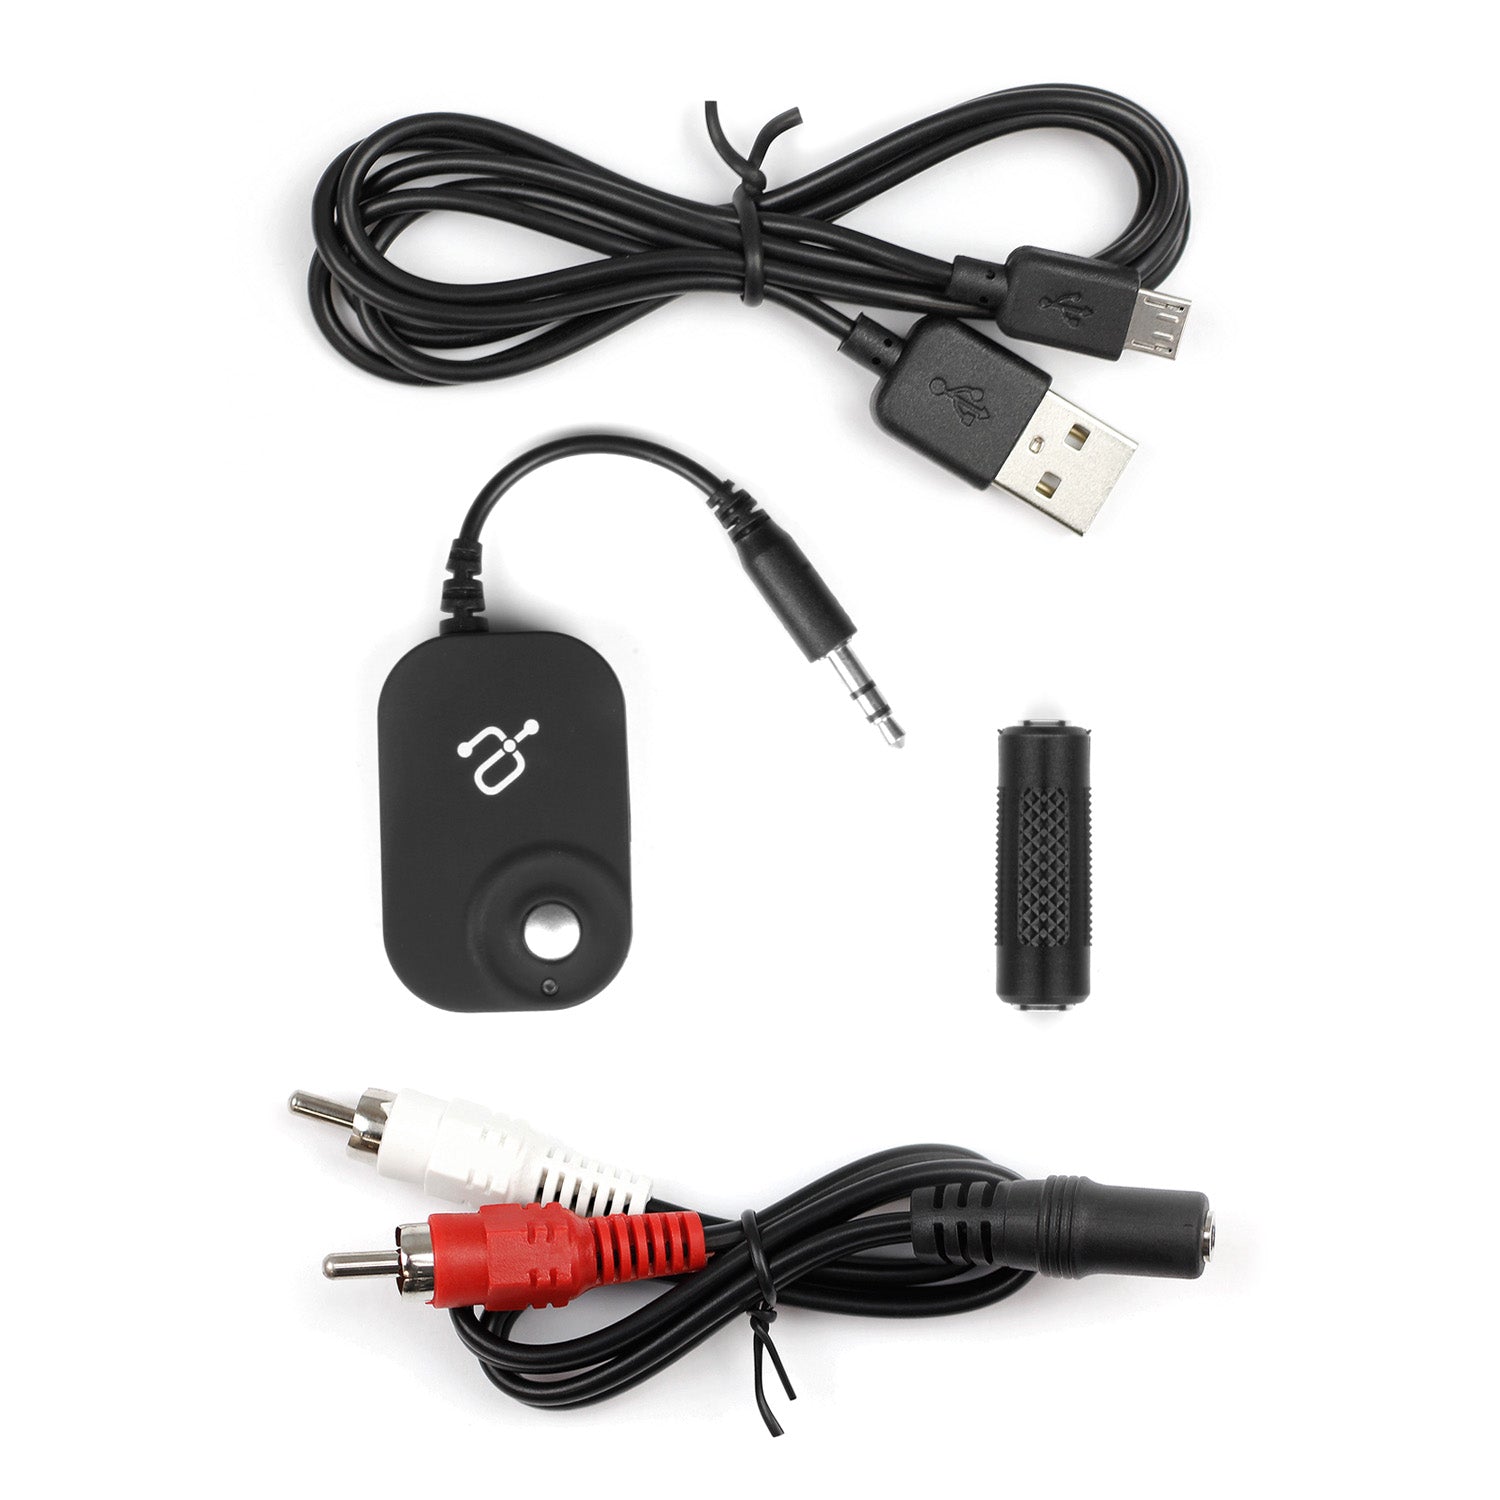 Bluetooth 3.0 Adapter Jack Receiver + EDR + 3.5mm Audio + Microphone